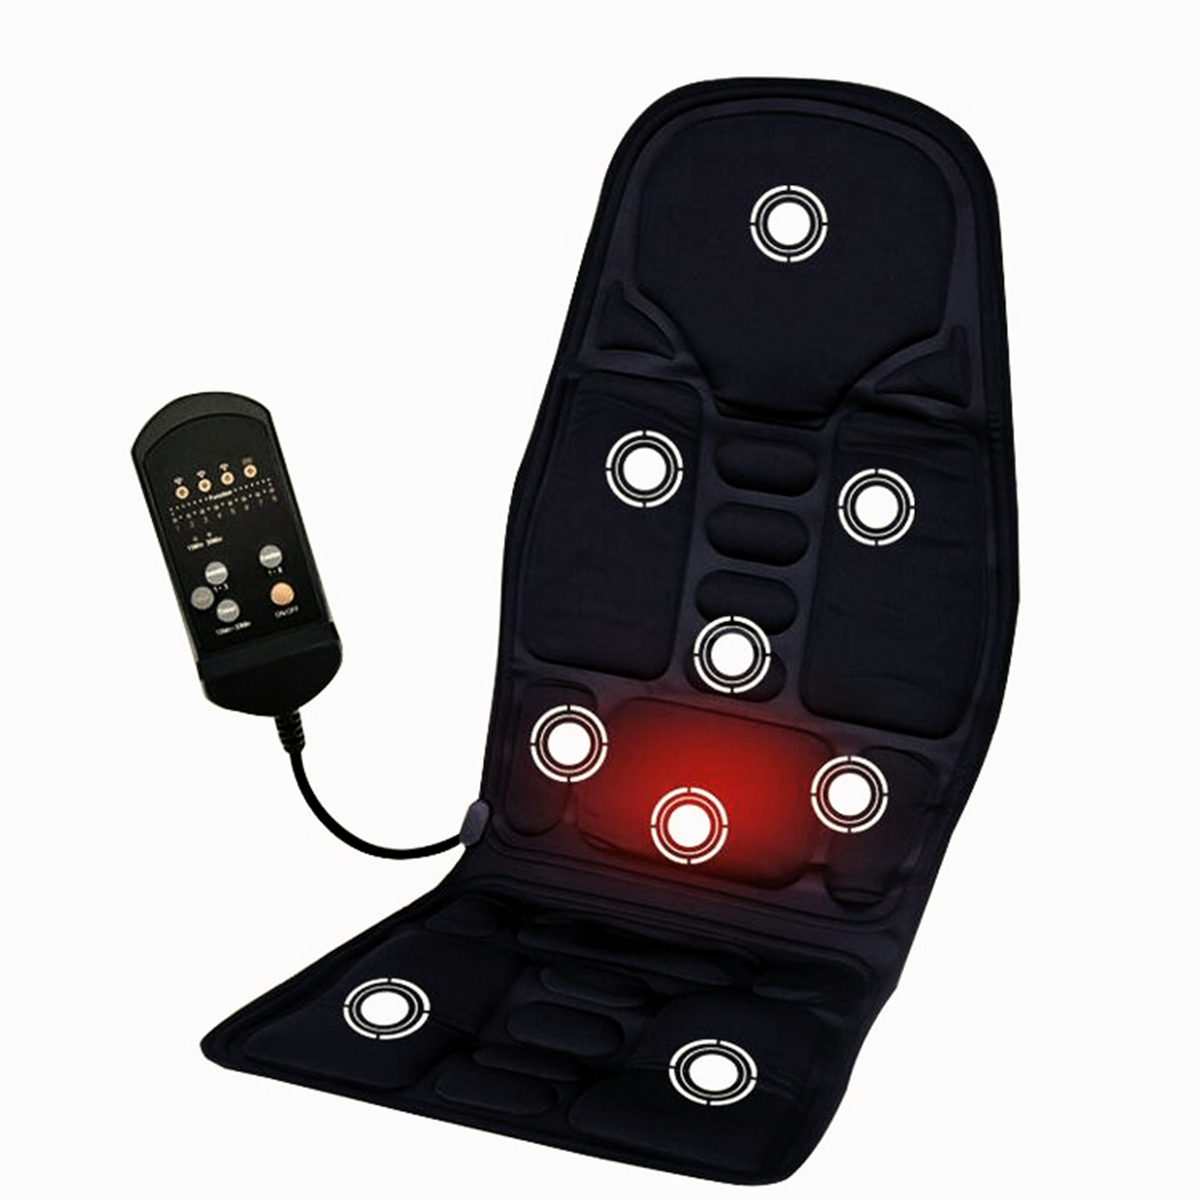 12V-Car-Household-Heated-Full-Body-Massage-Seat-Cushion-Back-Lumbar-Pain-Relief-Vibration-Massager-1127375